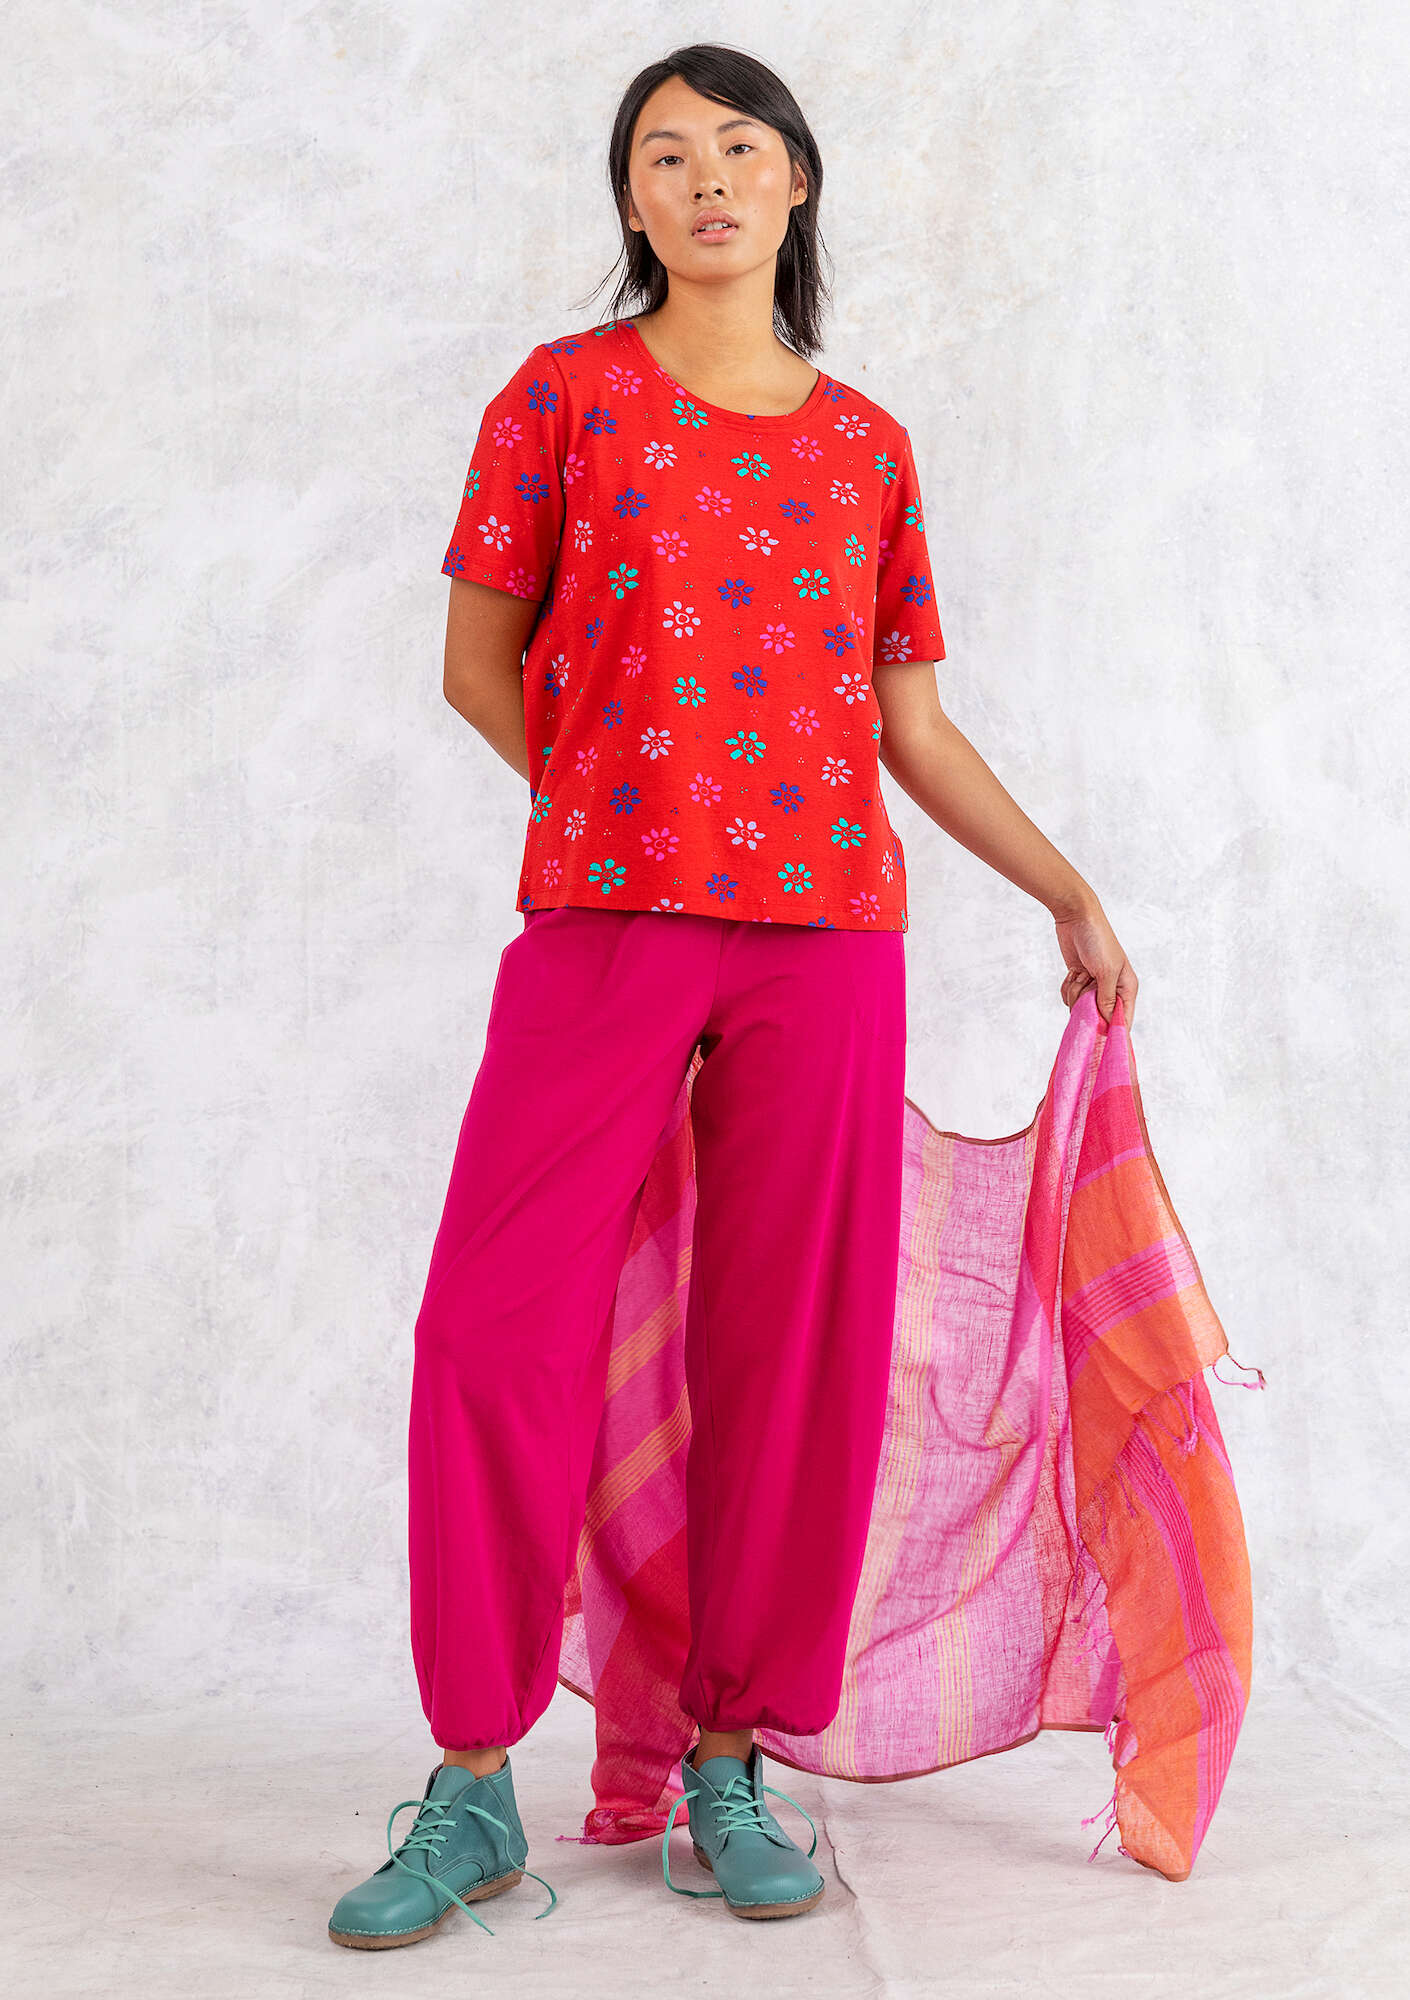 “Ester” T-shirt in organic cotton/spandex parrot red/patterned